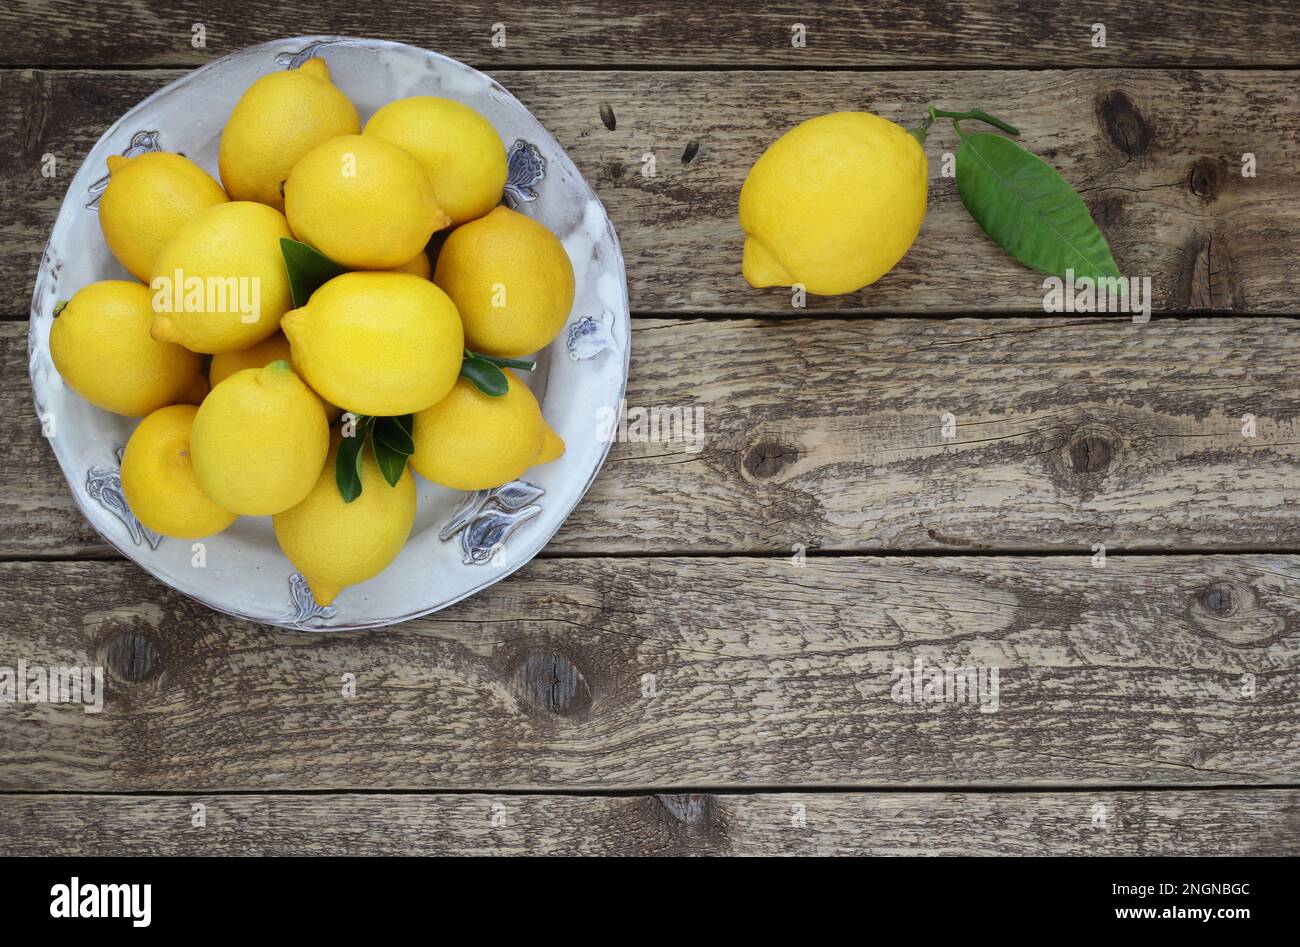 Fresh lemons fruit on a plate on a wooden table. Top view. Decorative arrangement of lemons with leaves on wood background. Stock Photo